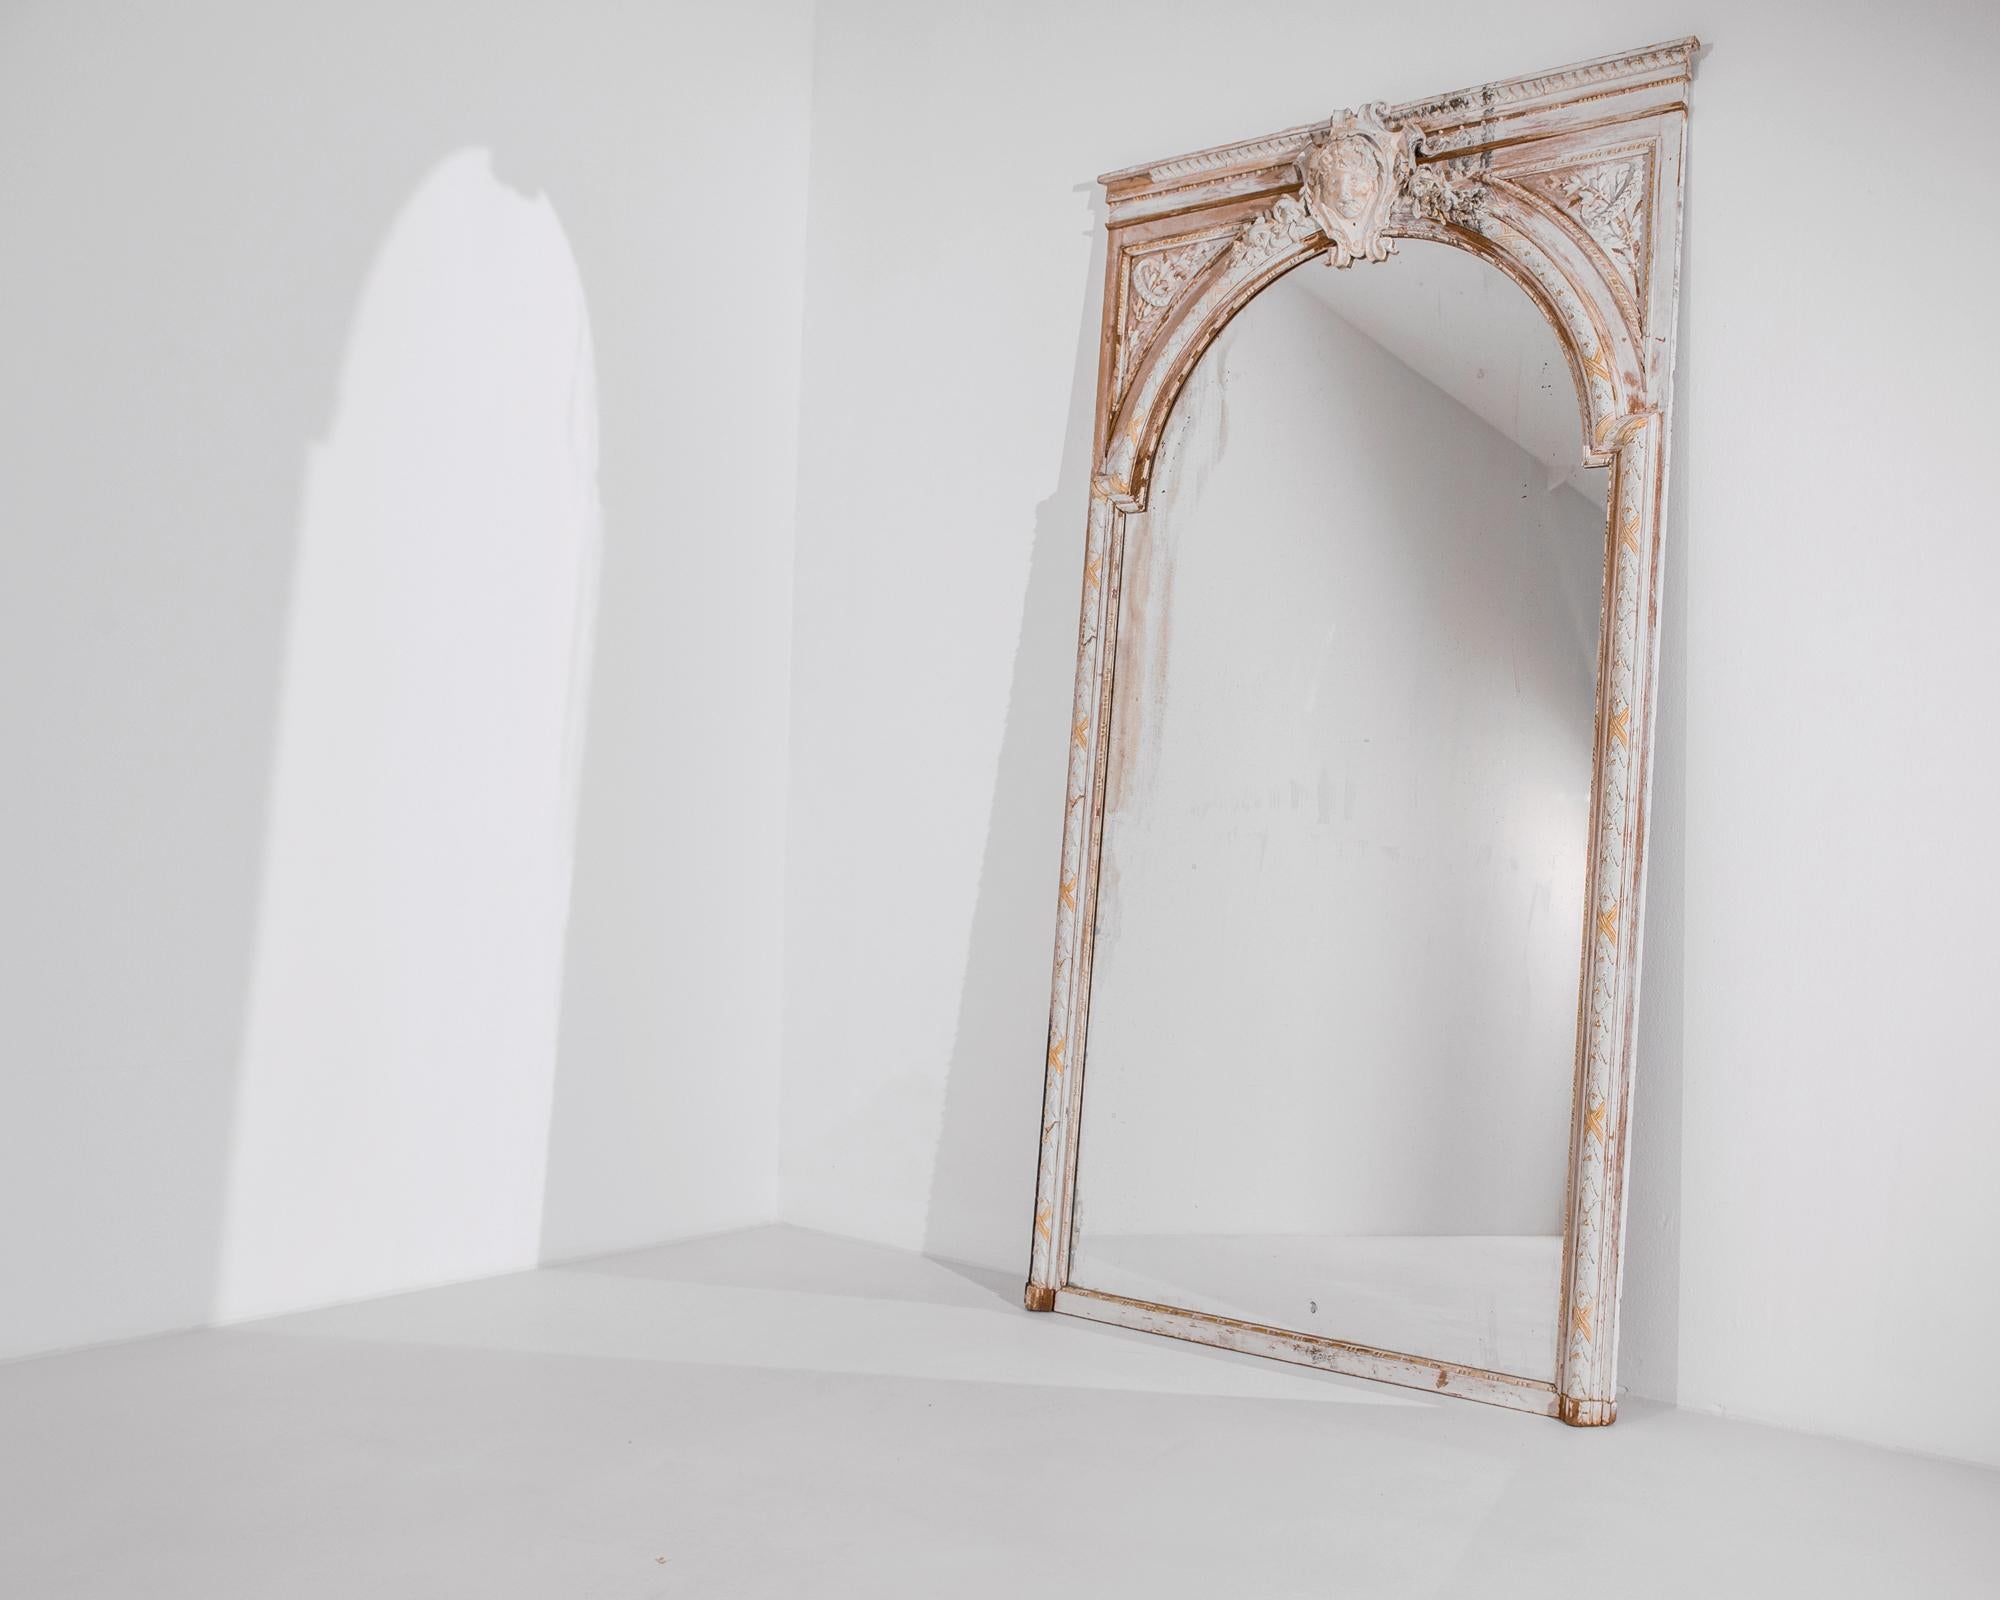 This antique wall mirror from France, circa 1860, offers an ornate carved frame gilded and adorned with a boyish mythological figure. An airy entryway expanding your interior space, the patinated gold and white paint gives this arched mirror a